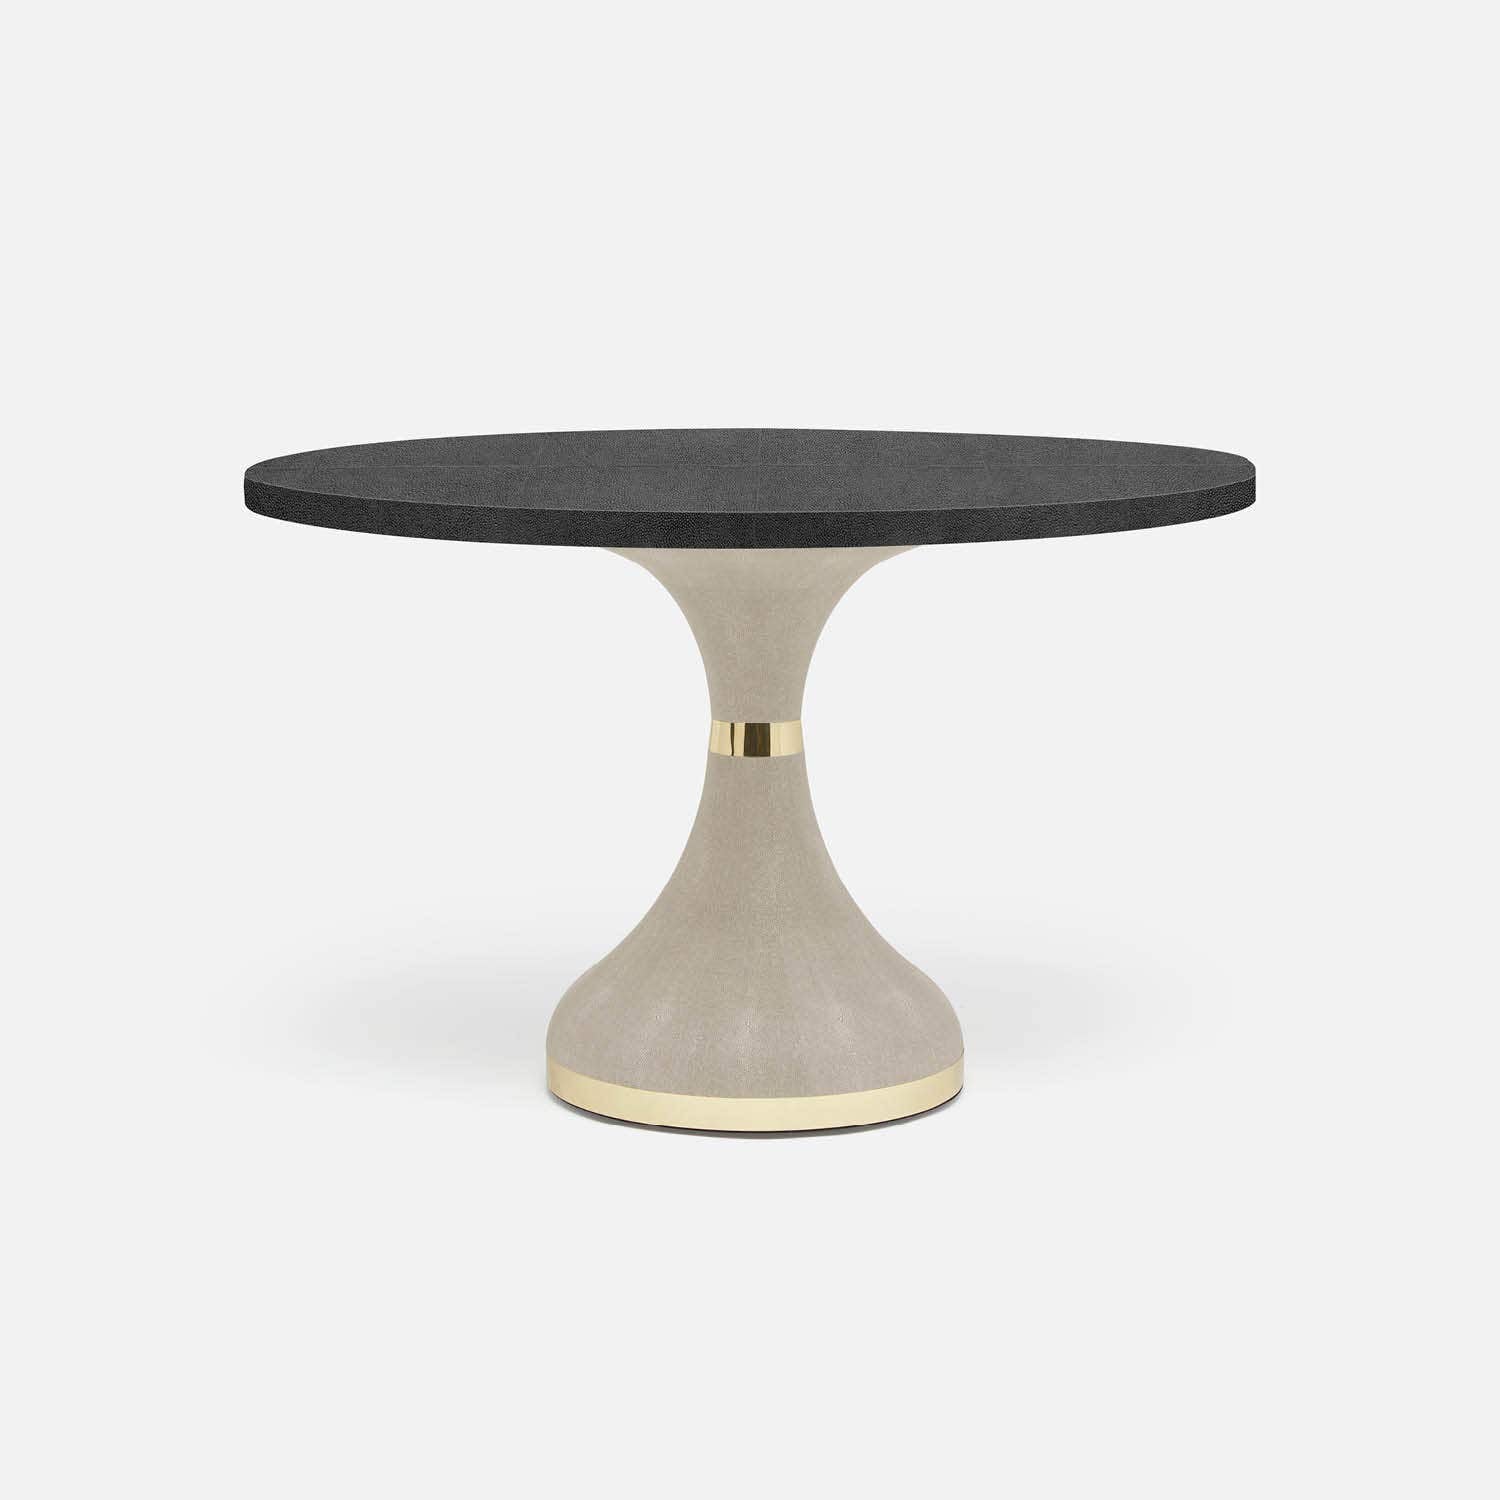 Made Goods Elis 72" x 30" Sand Realistic Faux Shagreen Dinning Table With Round Black Vintage Faux Shagreen Table Top